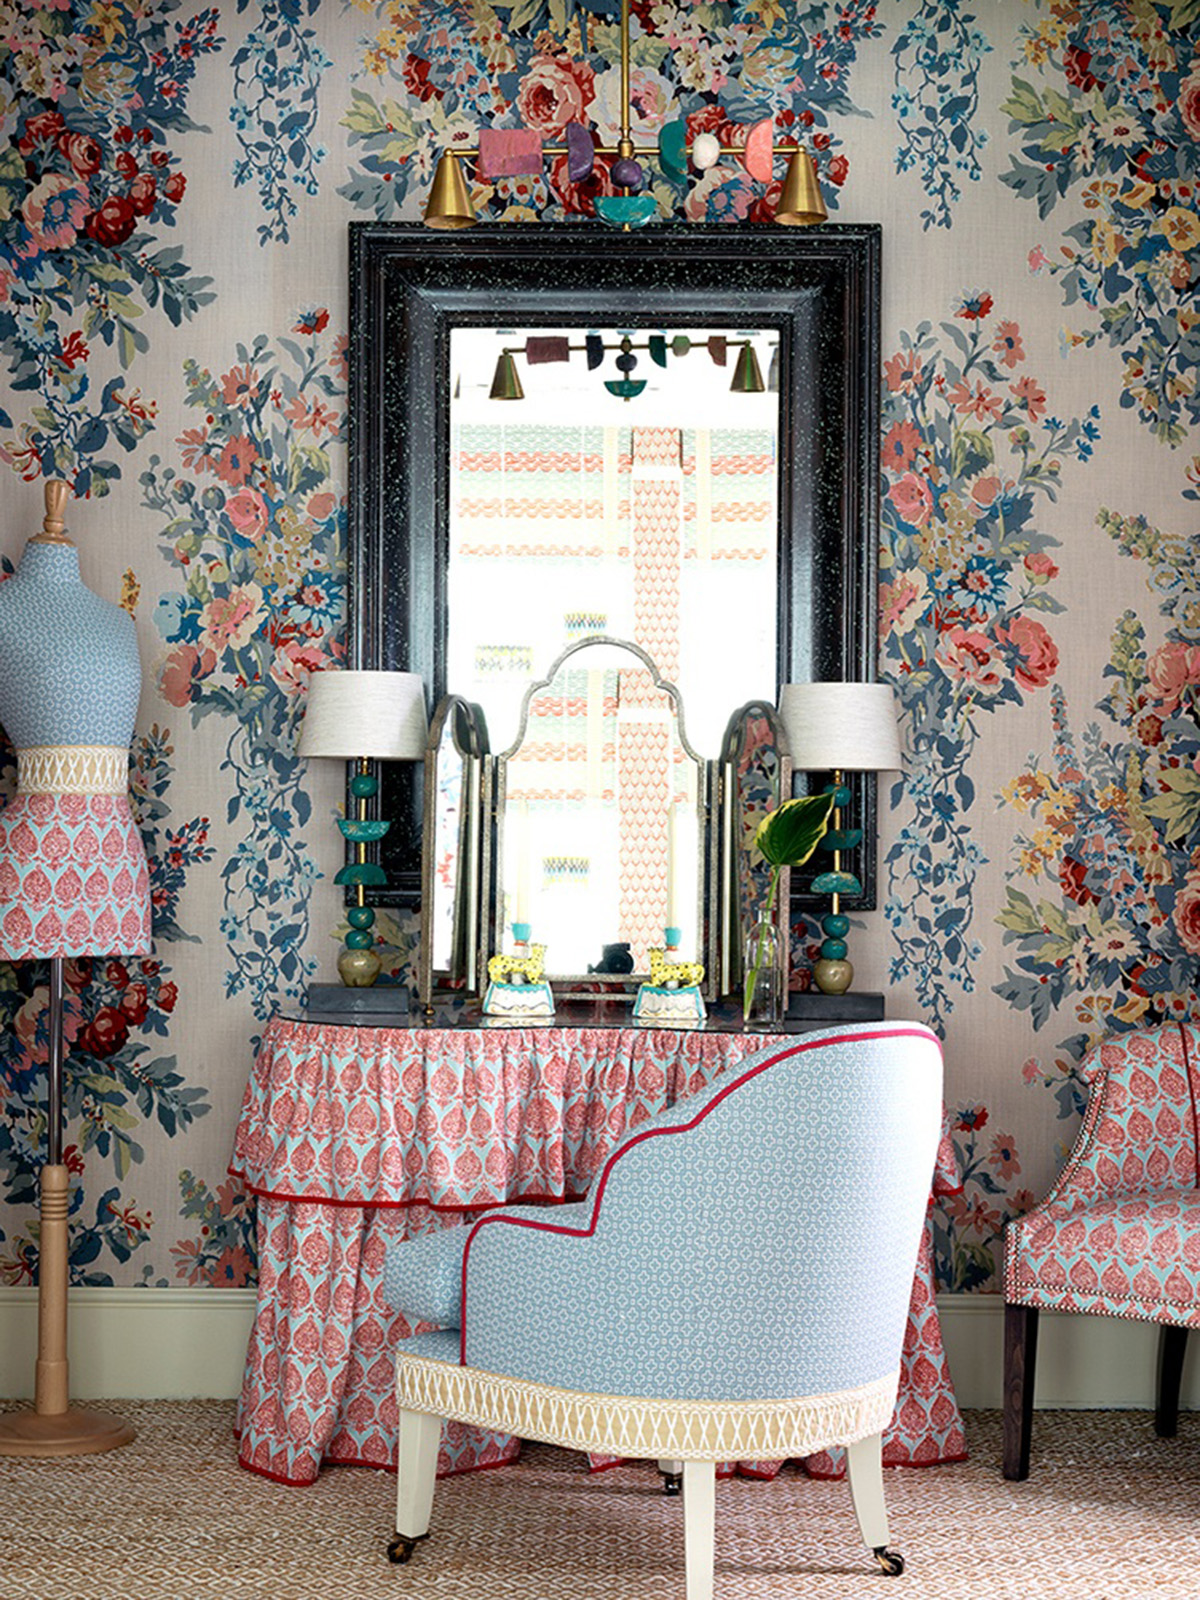 When planning a dressing room it's the perfect opportunity to explore your maximalist tendancies so go for big printed wallpapers, lush furnishings, and oversized dressing mirrors. This room designed by Kit Kemp is a feminine boudoir. To find out more about how to design a dressing room listen to The Great Indoors Podcast with Kate Watson Smyth and interior deisgner Sophie Robinson